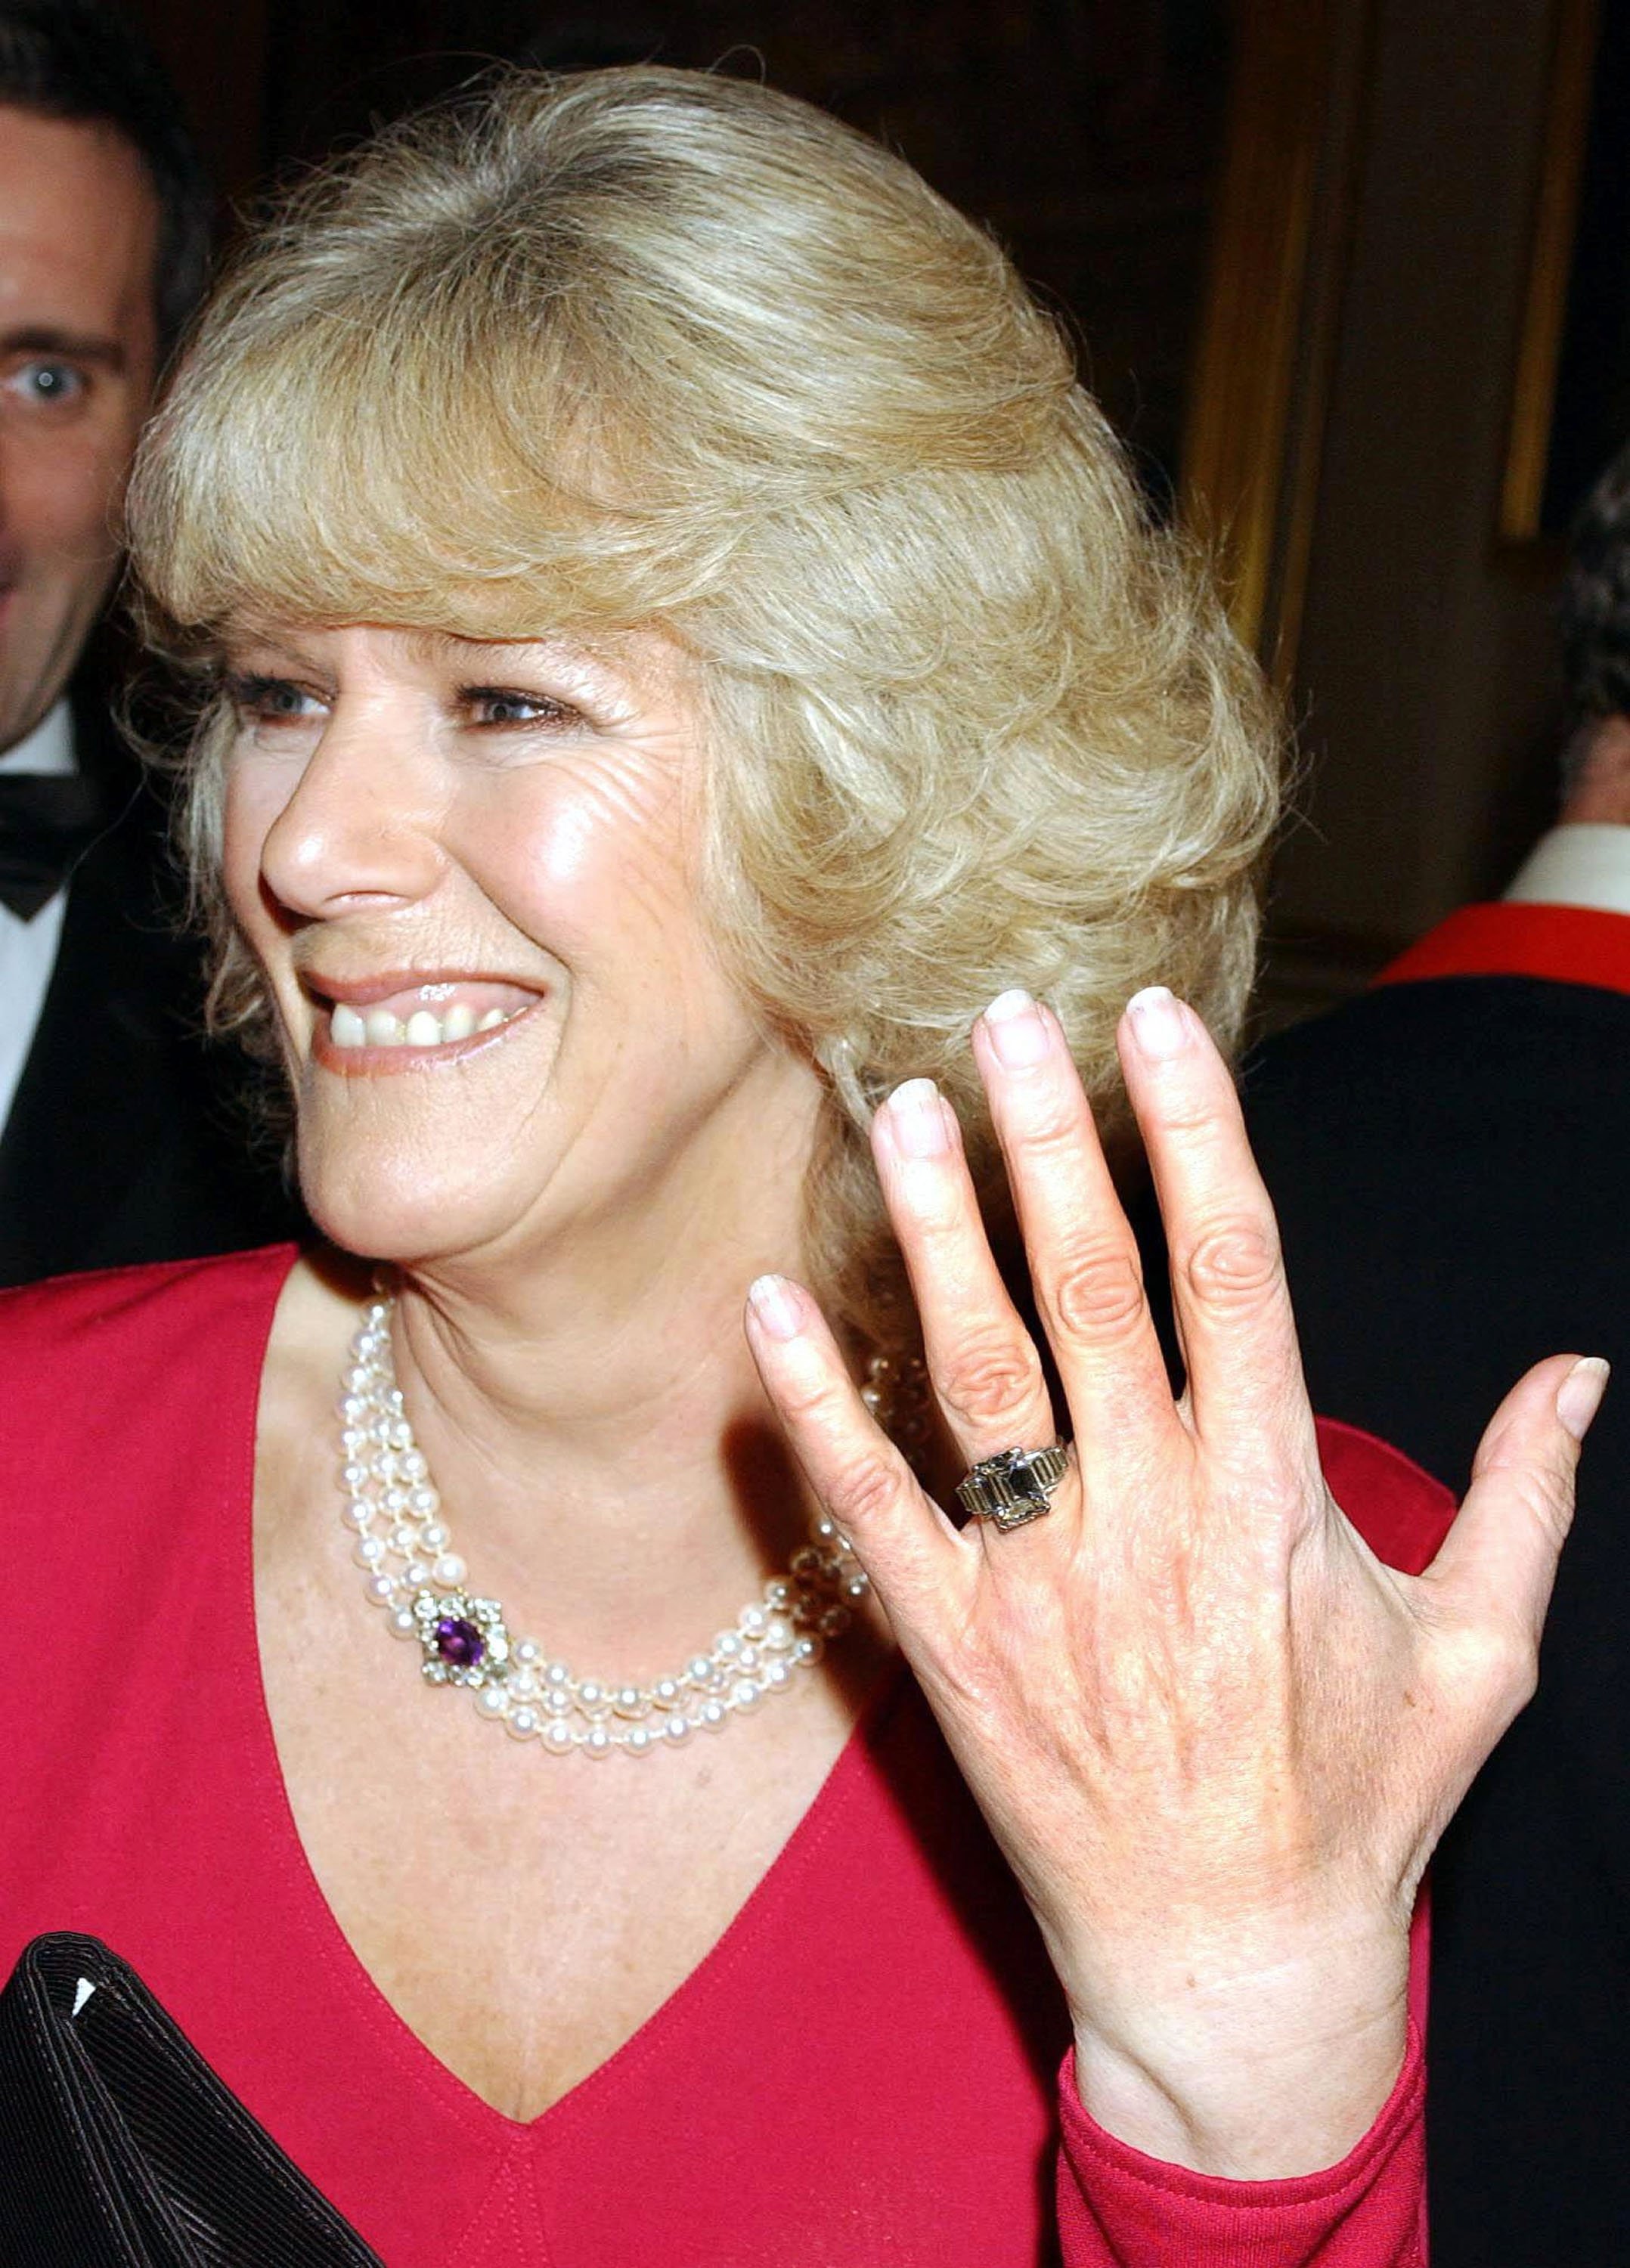 Camilla Parker Bowles shows her engagement ring when she arrives for a party at Windsor Castle after announcing their engagement earlier 10 February, 2005. | Source: Getty Images